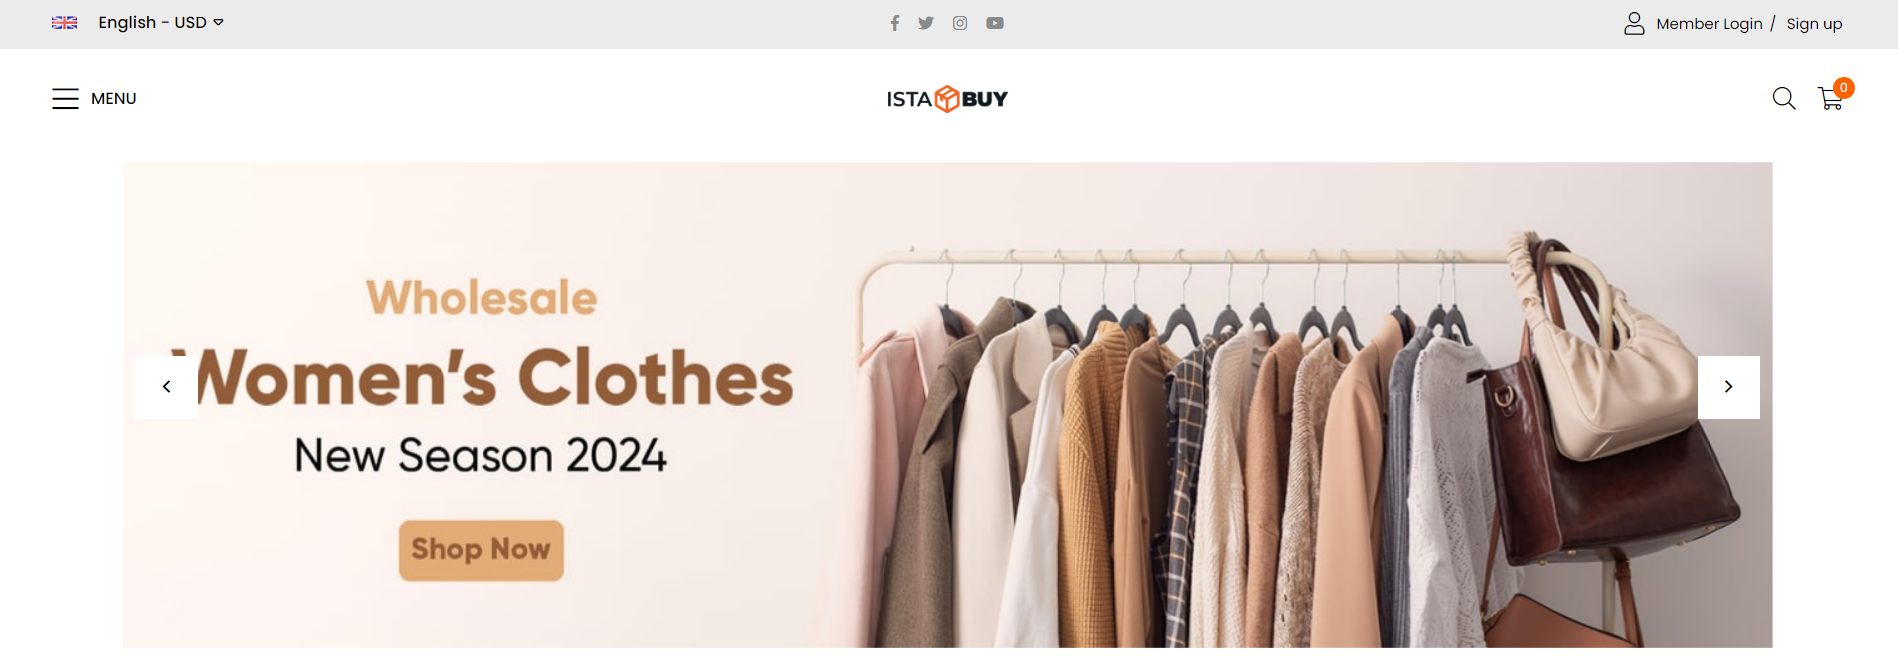 homepage of a wholesale clothing marketplace - IstaBuy